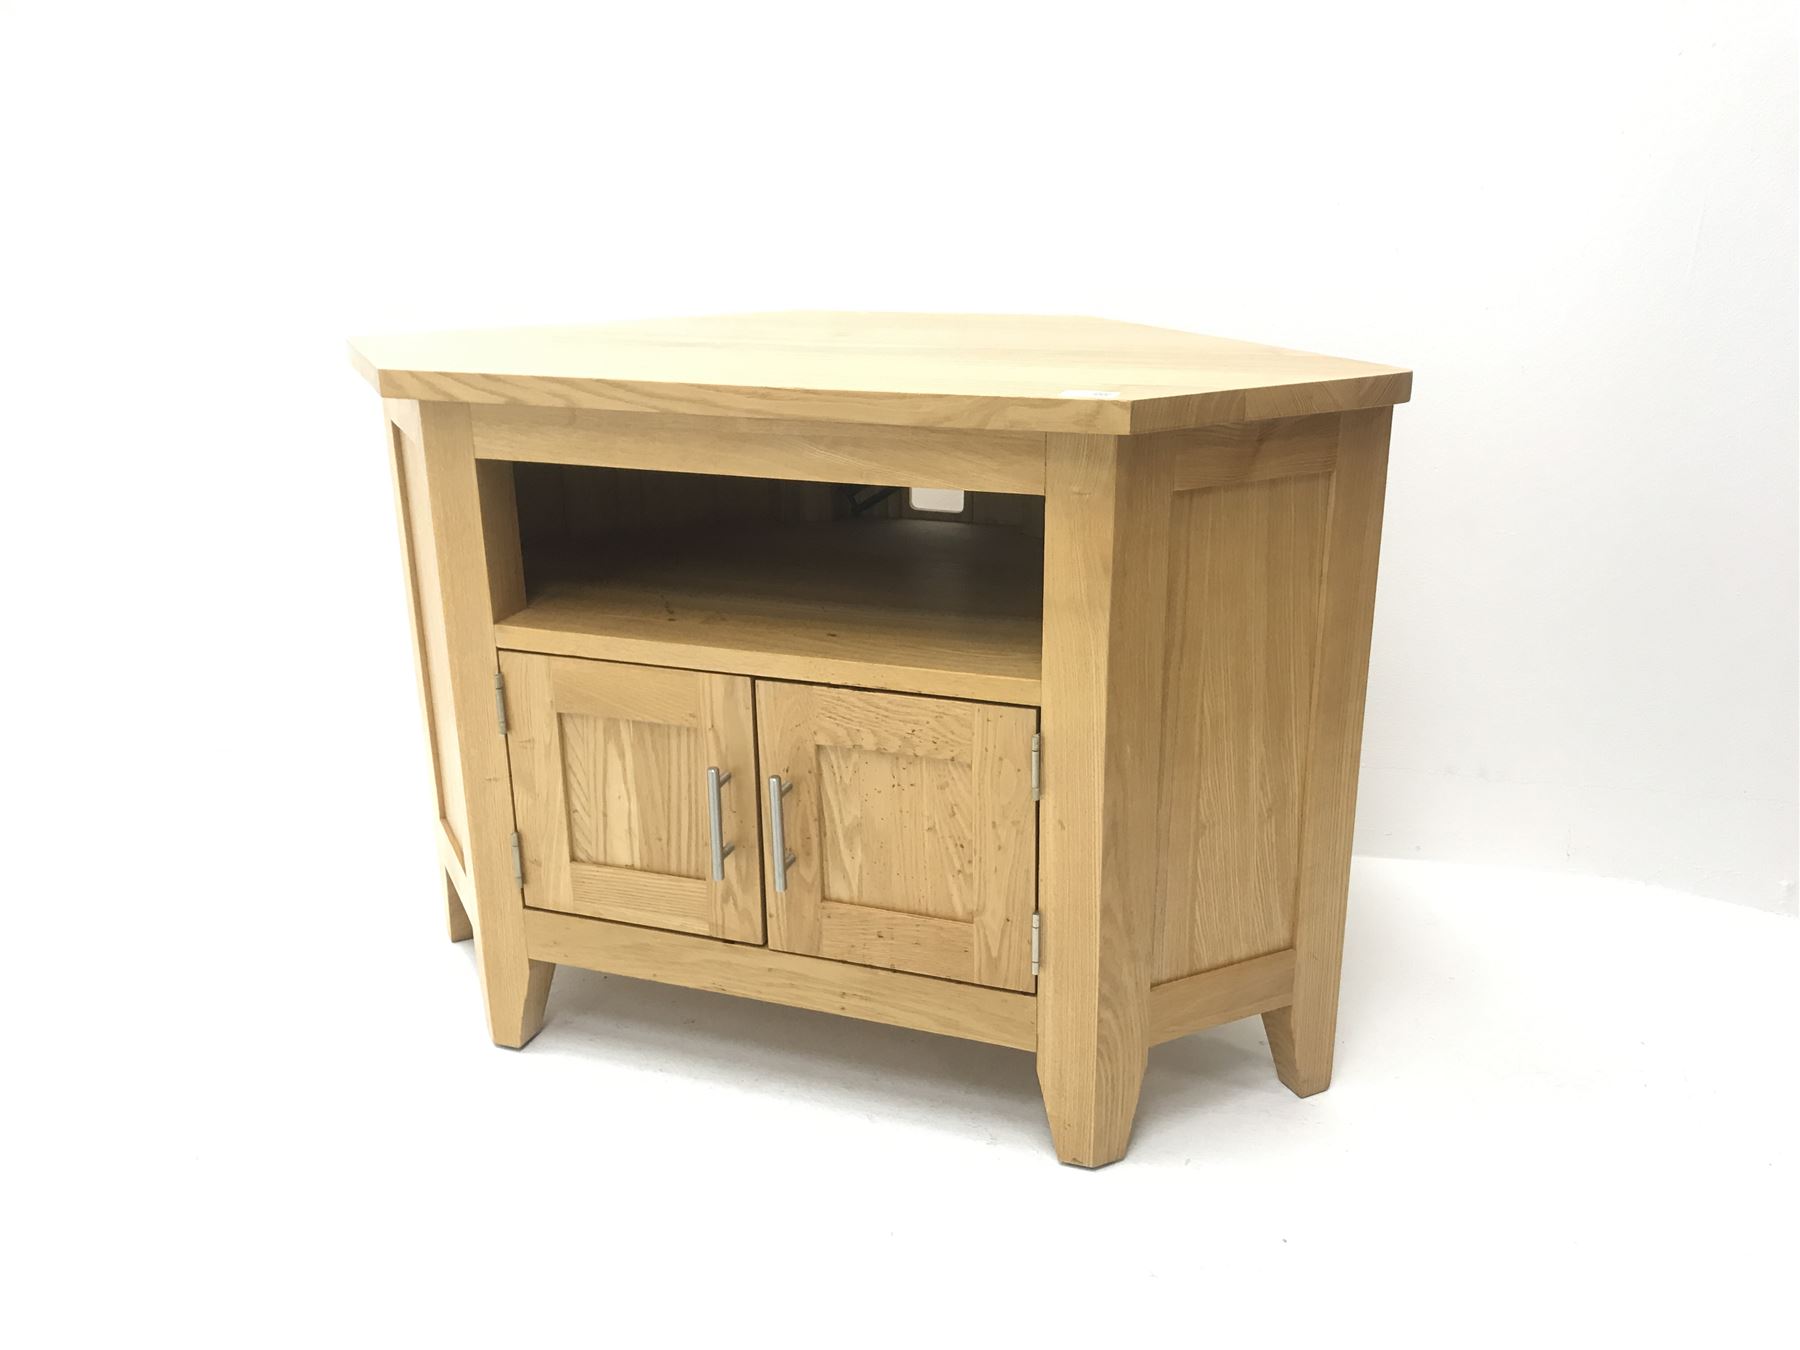 Light oak corner television stand, single shelf above two cupboard doors, stile supports